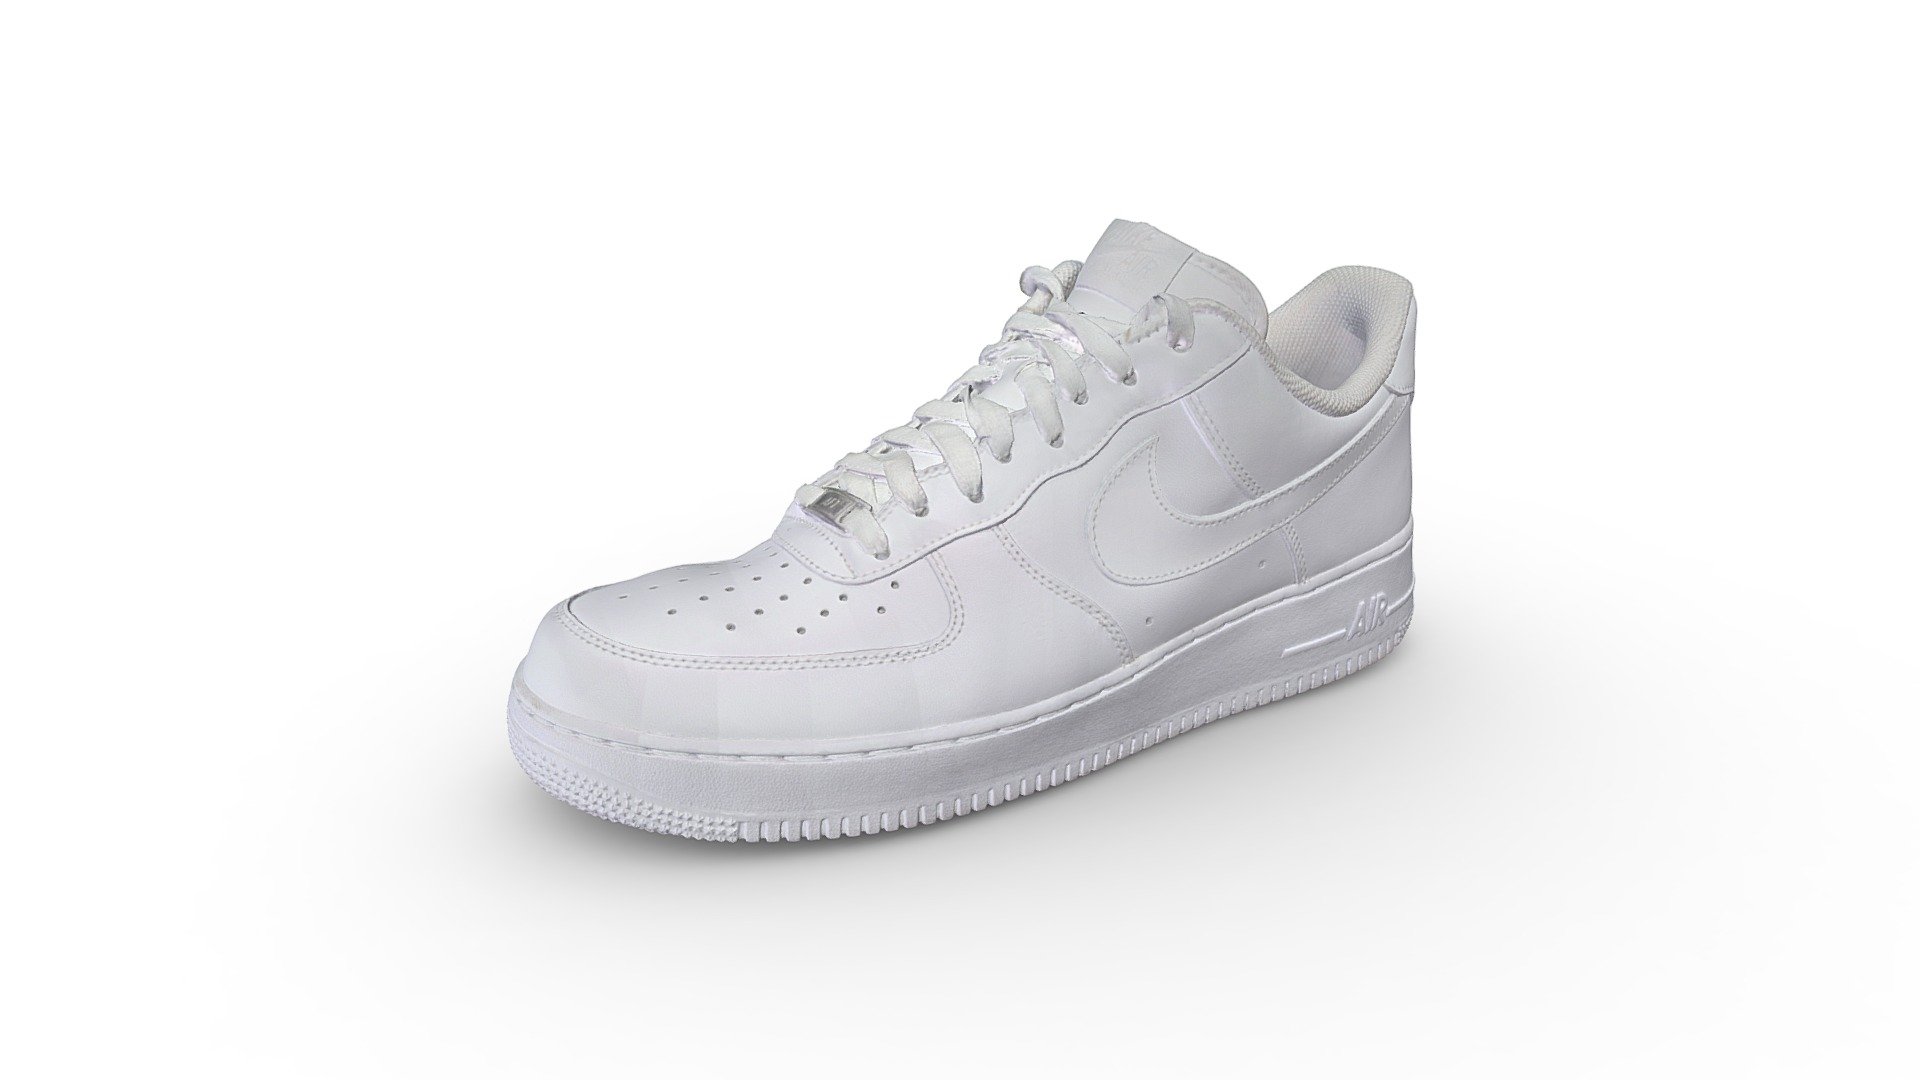 3D Scan of a Nike Air Force 1

The radiance lives on in the Nike Air Force 1 ’07, the b-ball OG that puts a fresh spin on what you know best: crisp leather in an all-white colorway for a statement look on and off the court 3d model